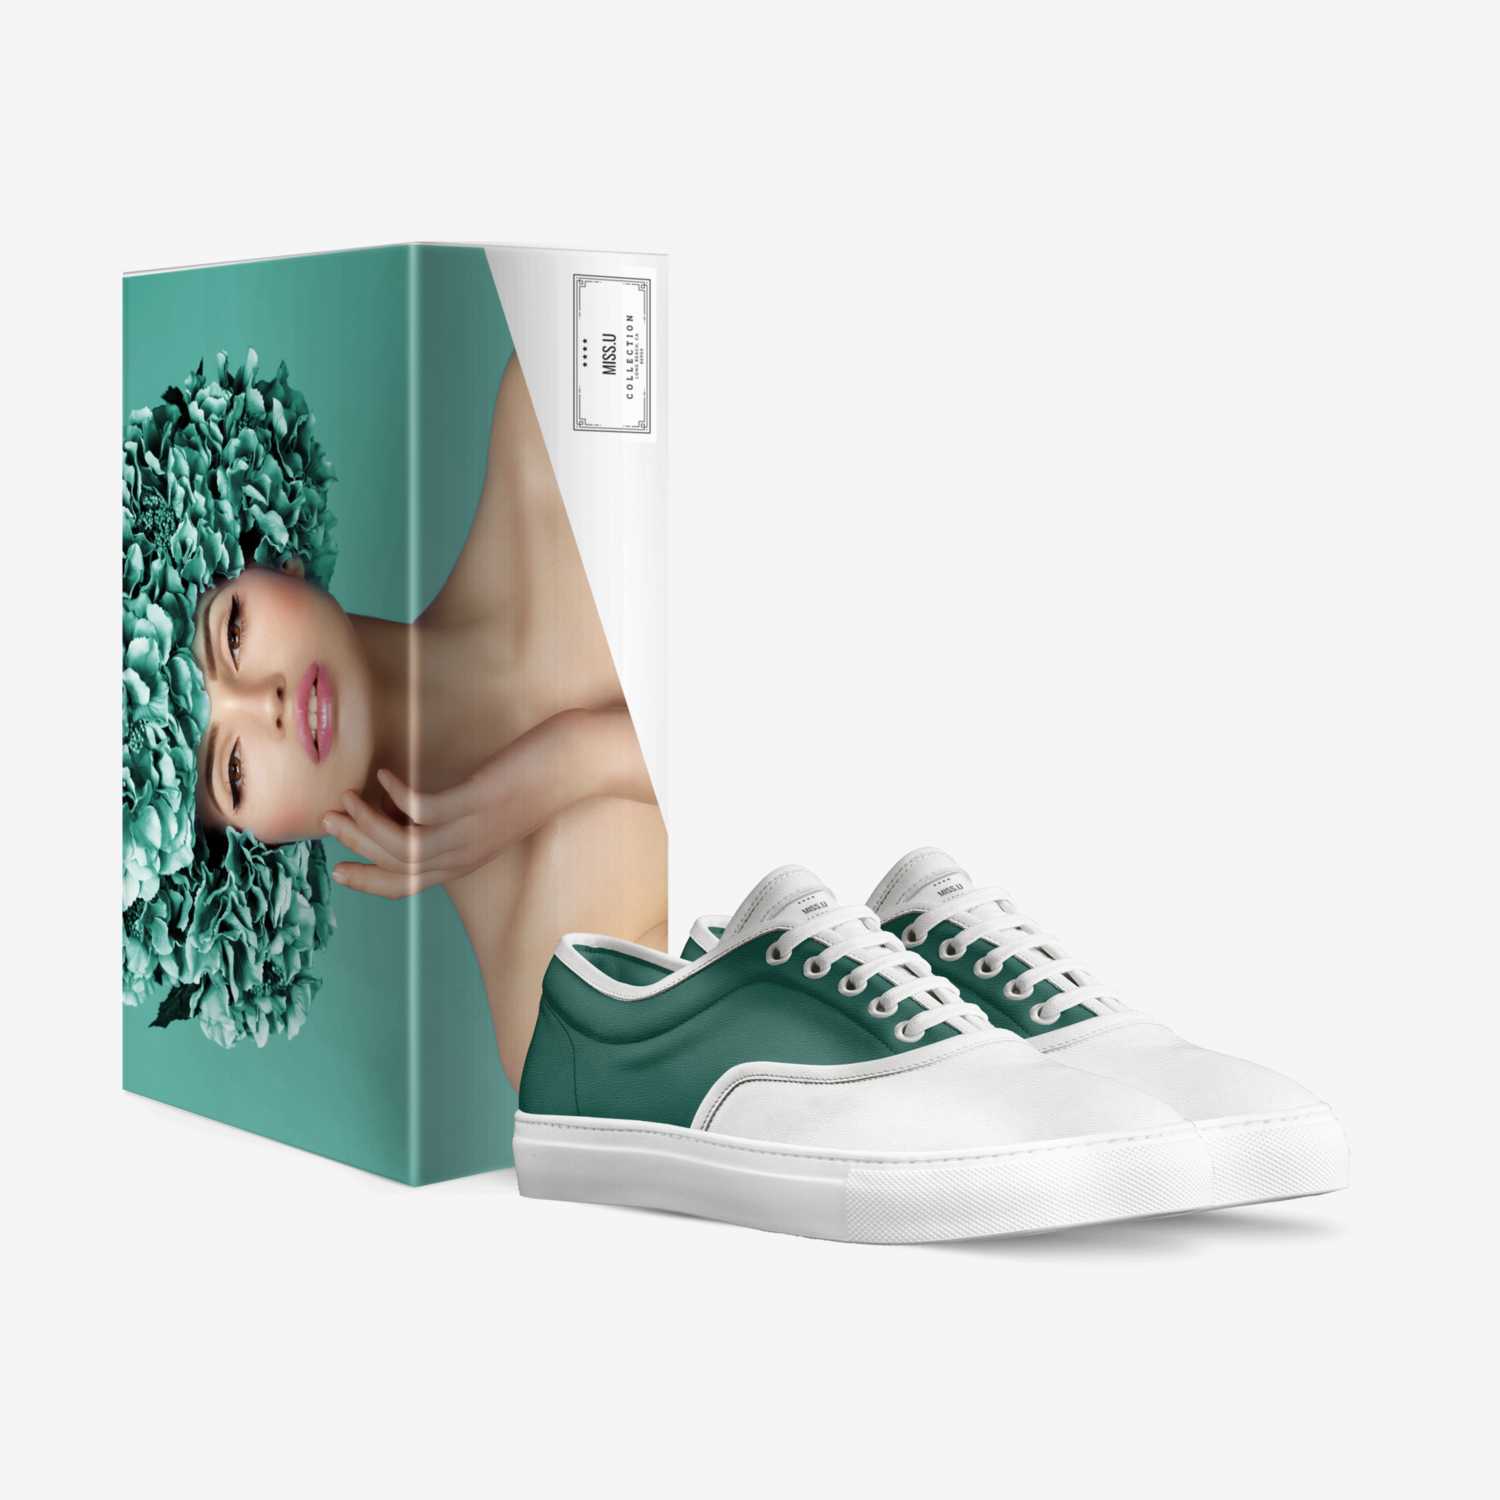 Miss.U custom made in Italy shoes by Frank Lichner | Box view